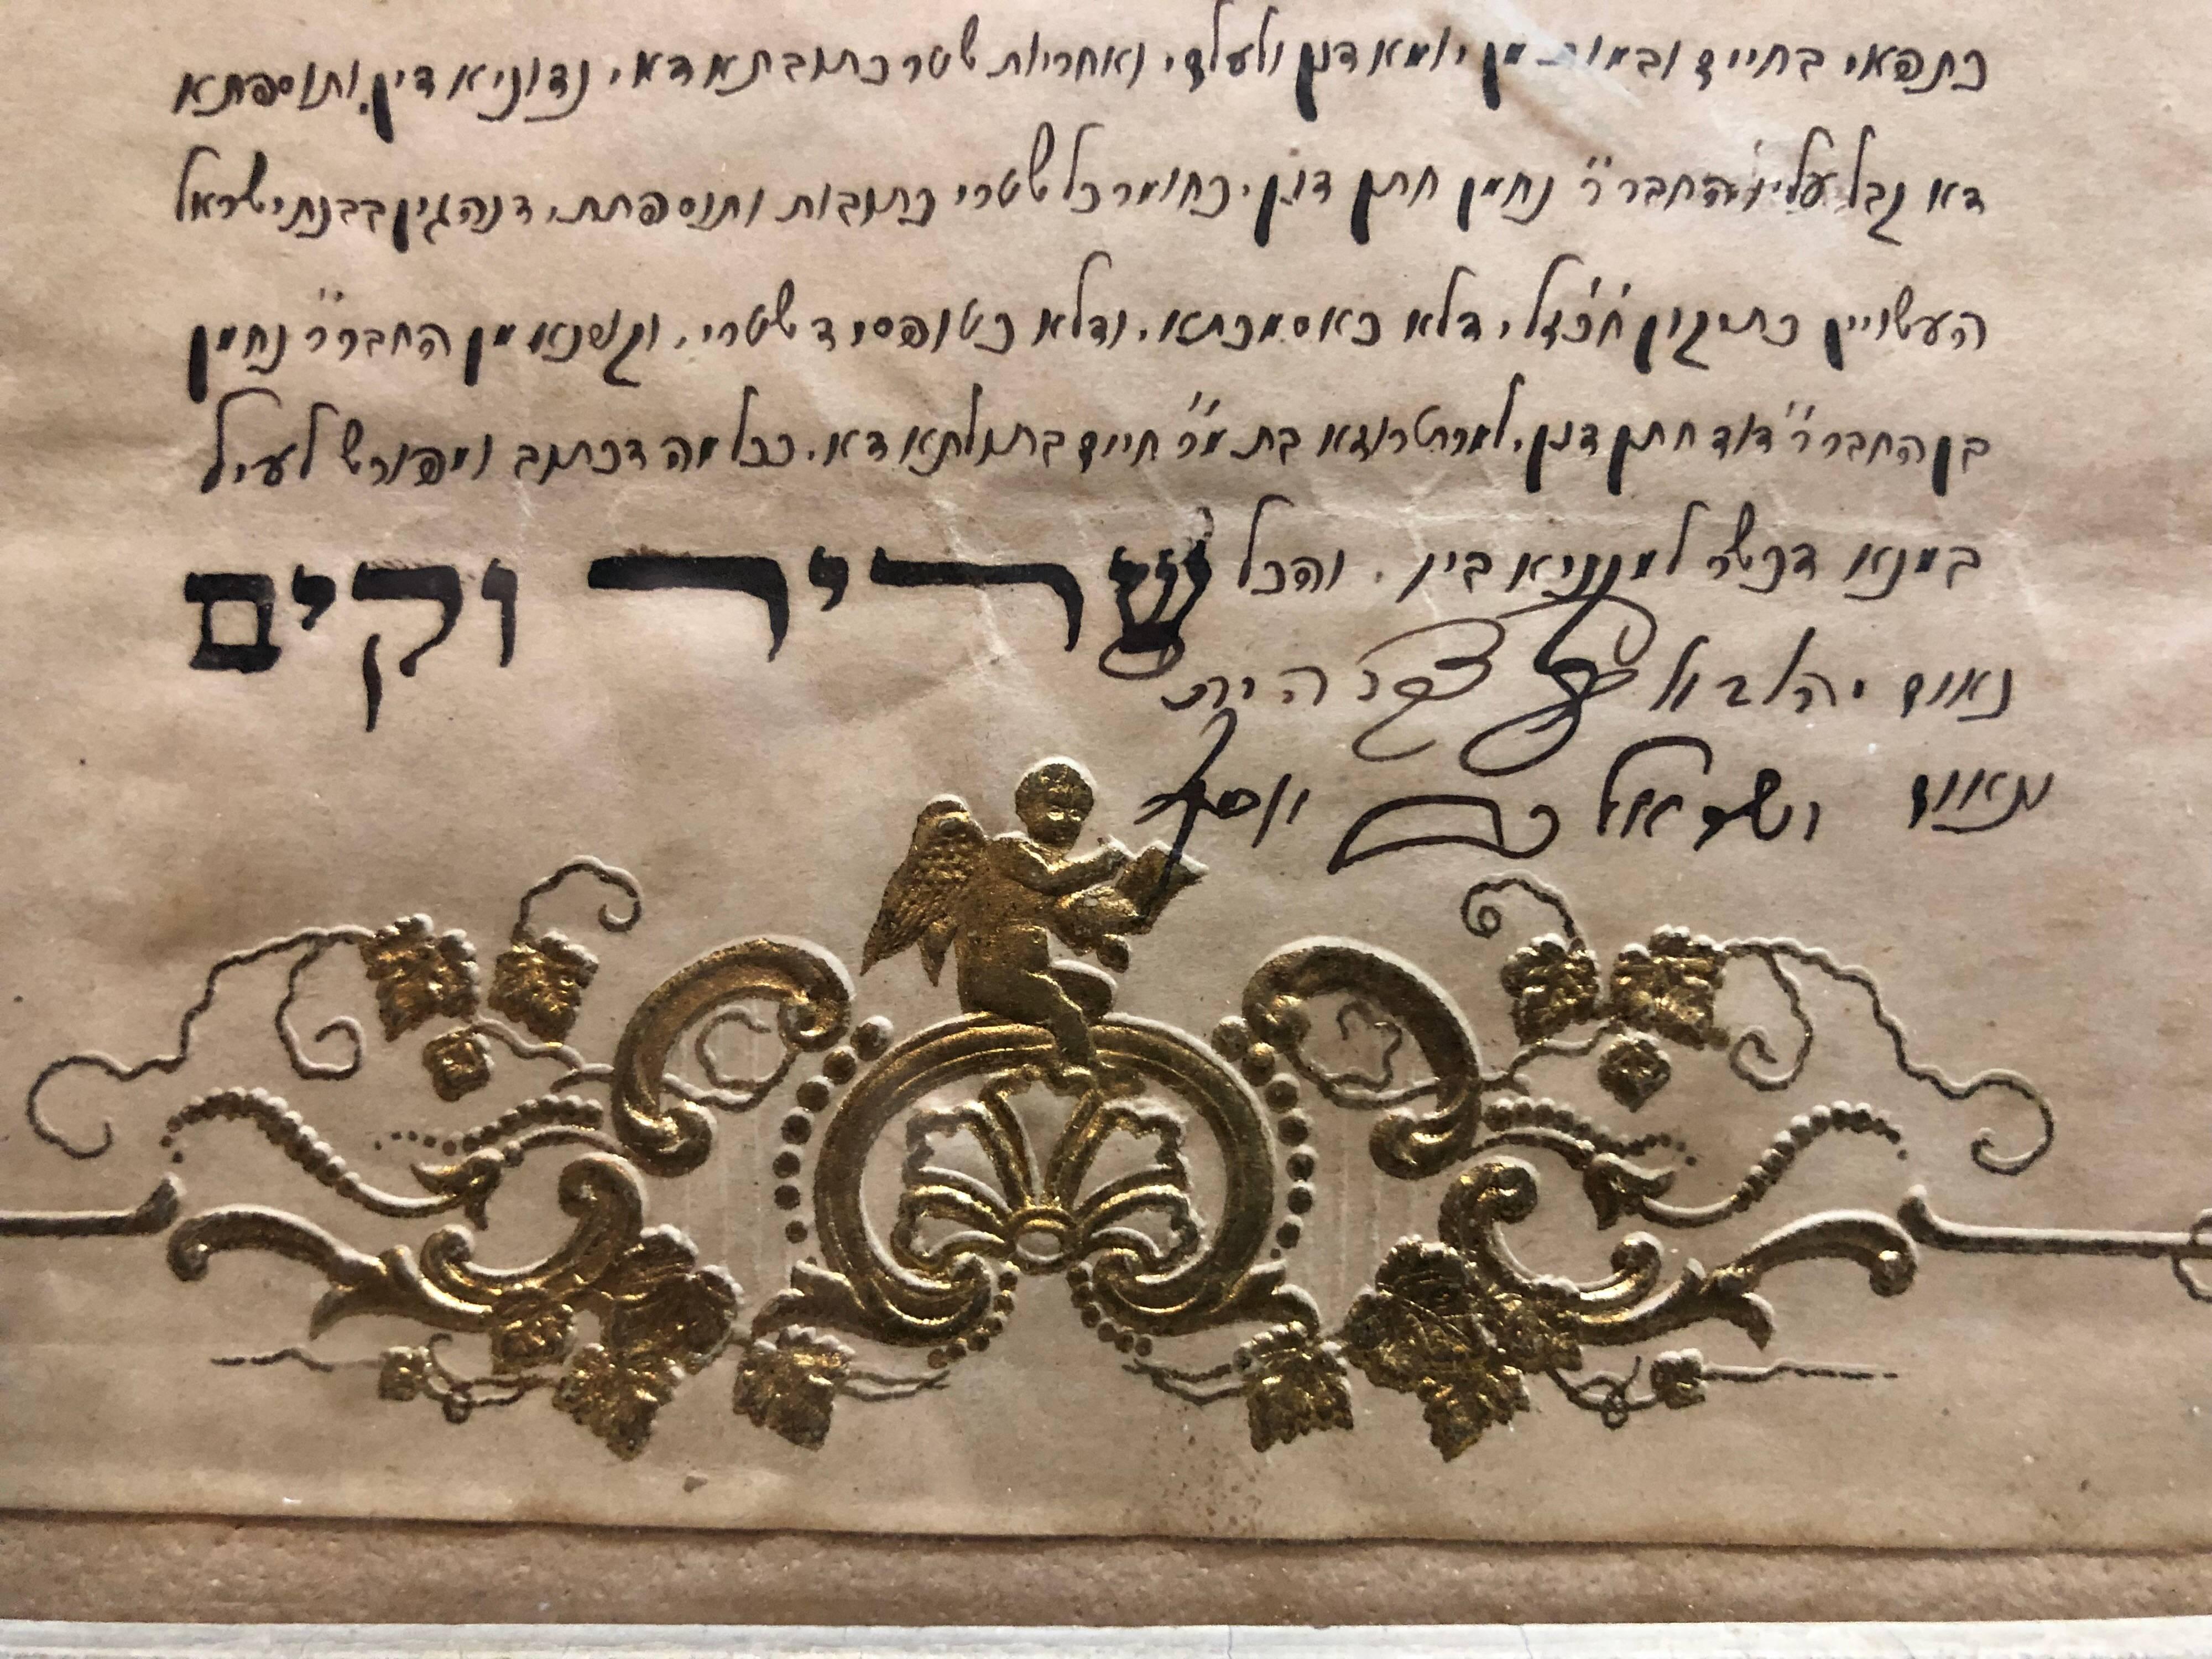 vintage jewish marriage contract, Most likely printed in Germany. Used in New York, hand dated 1870. A rare early American judaic piece.
all written out in a beautiful Hebrew calligraphy.

The Ketubah (pl. ketubot) is the standard marriage contract